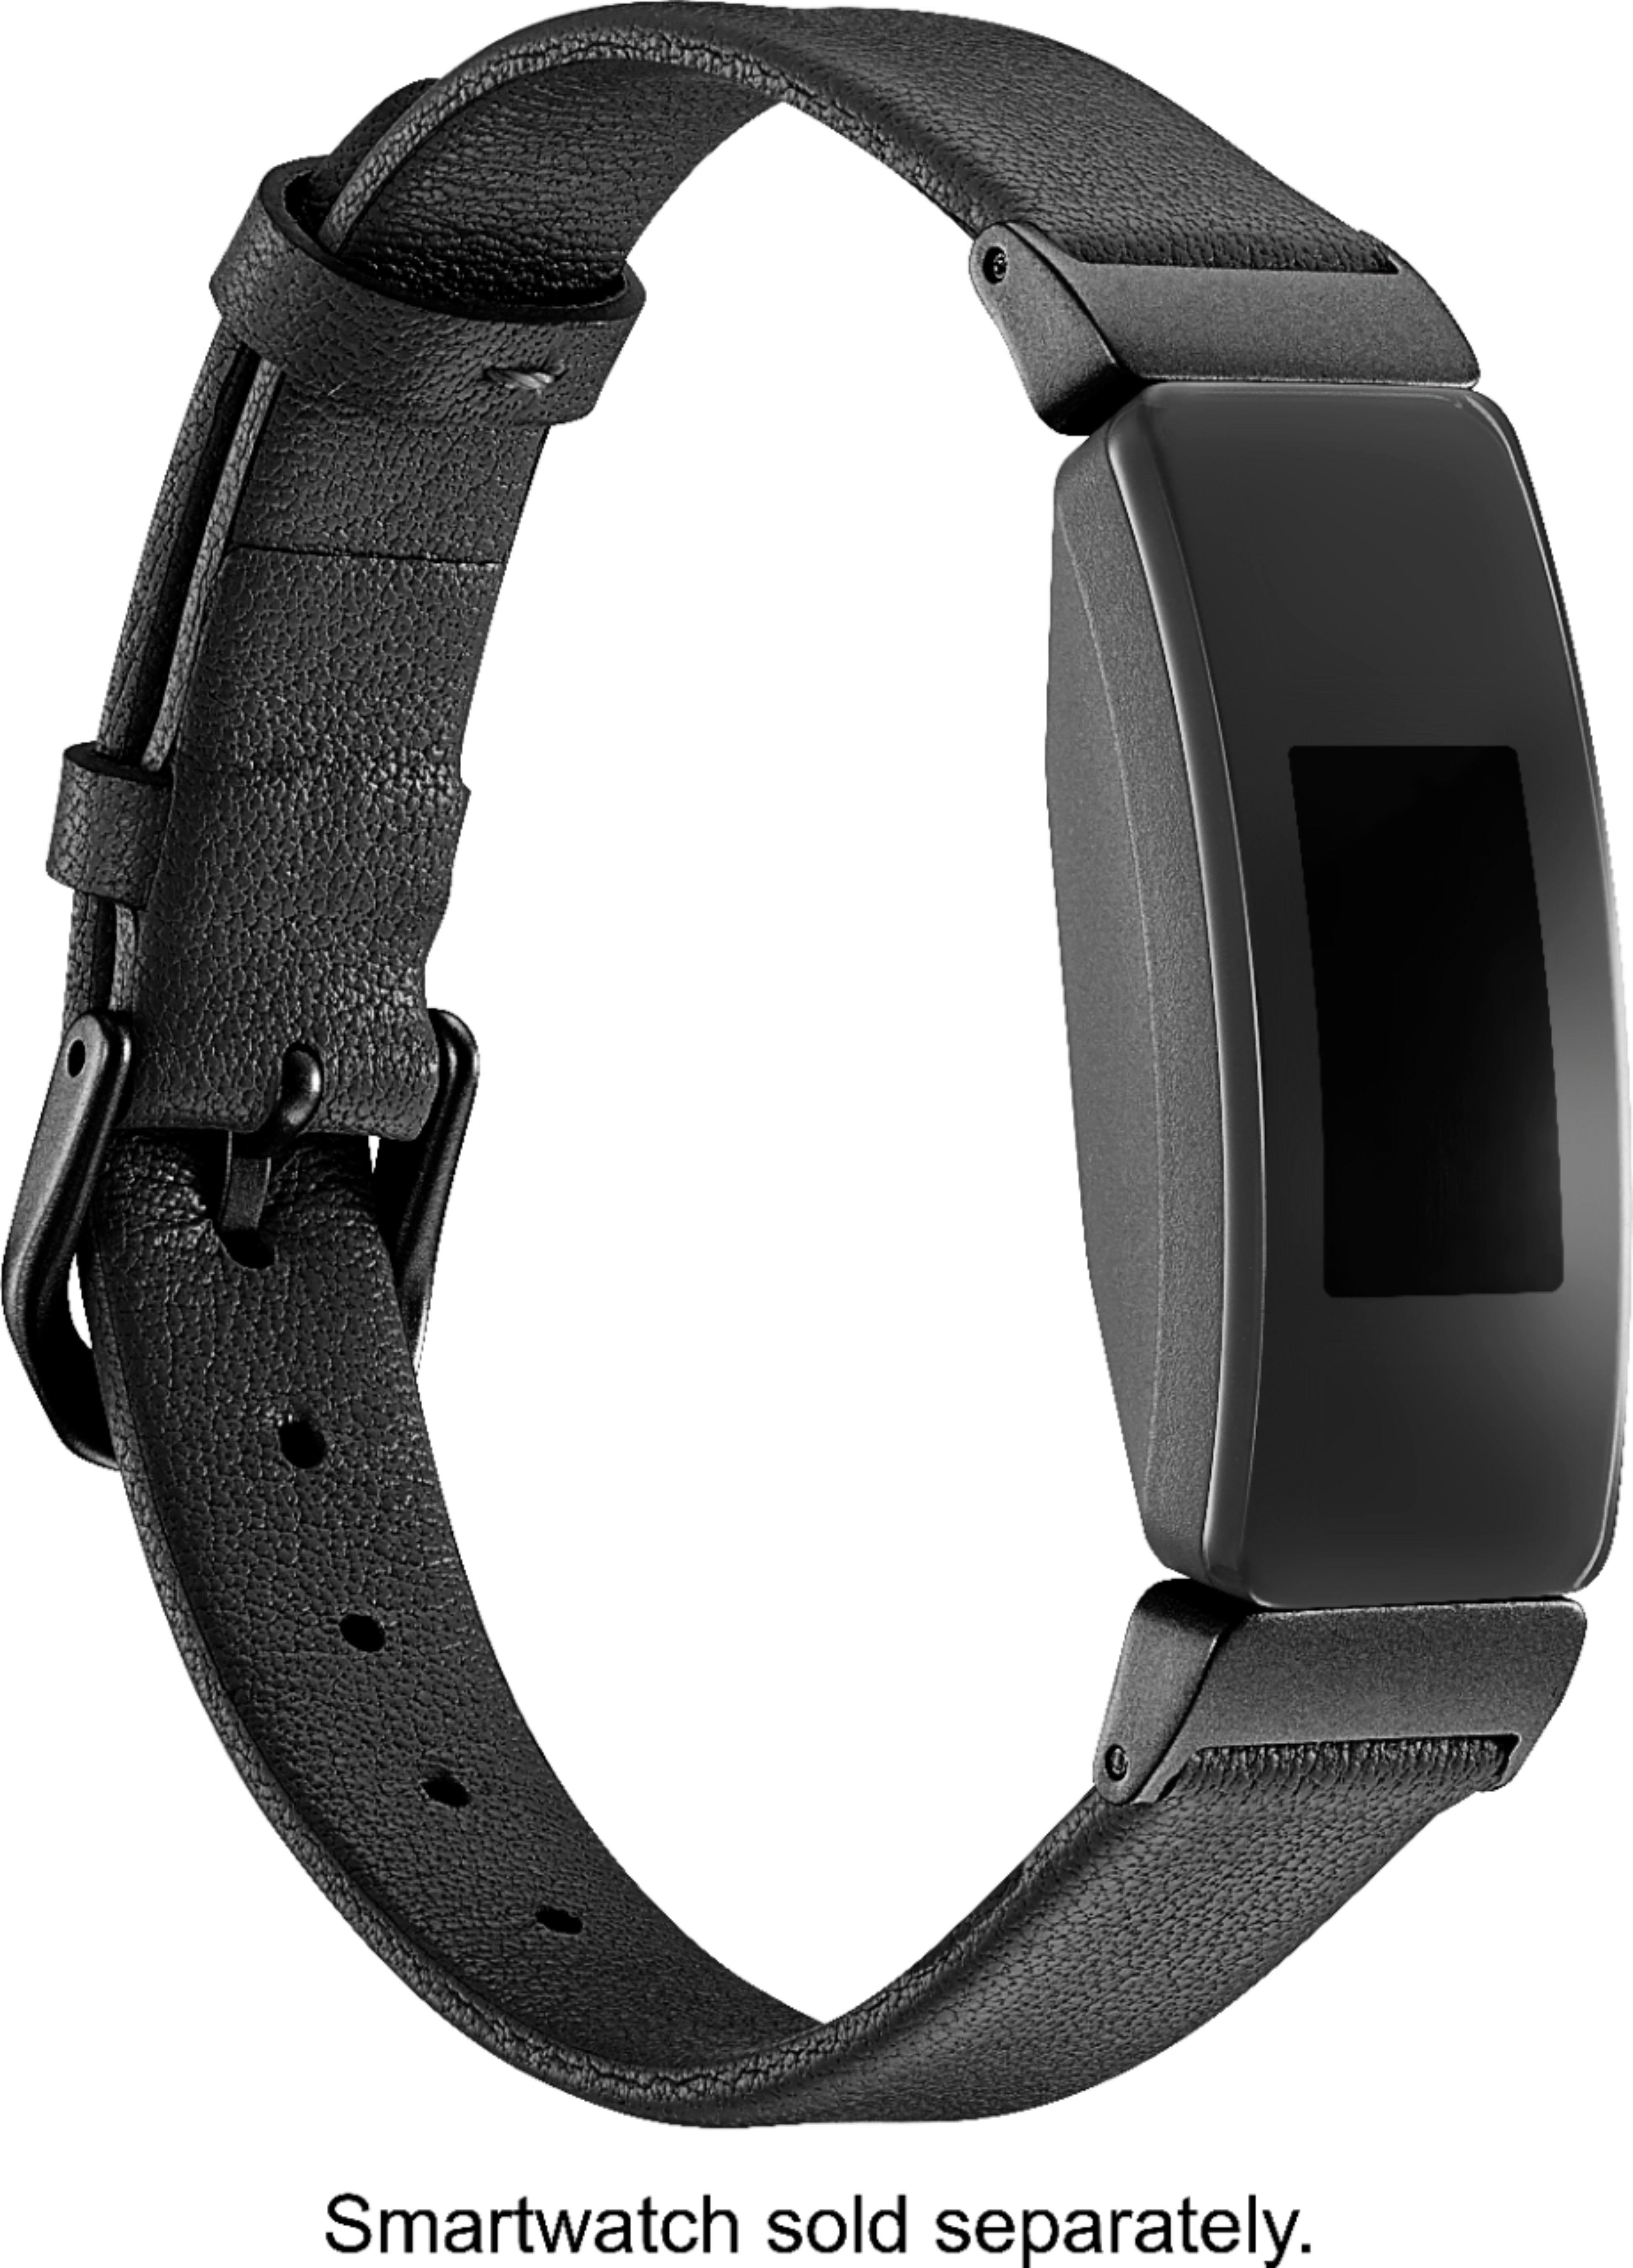 Angle View: Platinum™ - Horween Leather Band for Fitbit Inspire and Inspire HR - Black